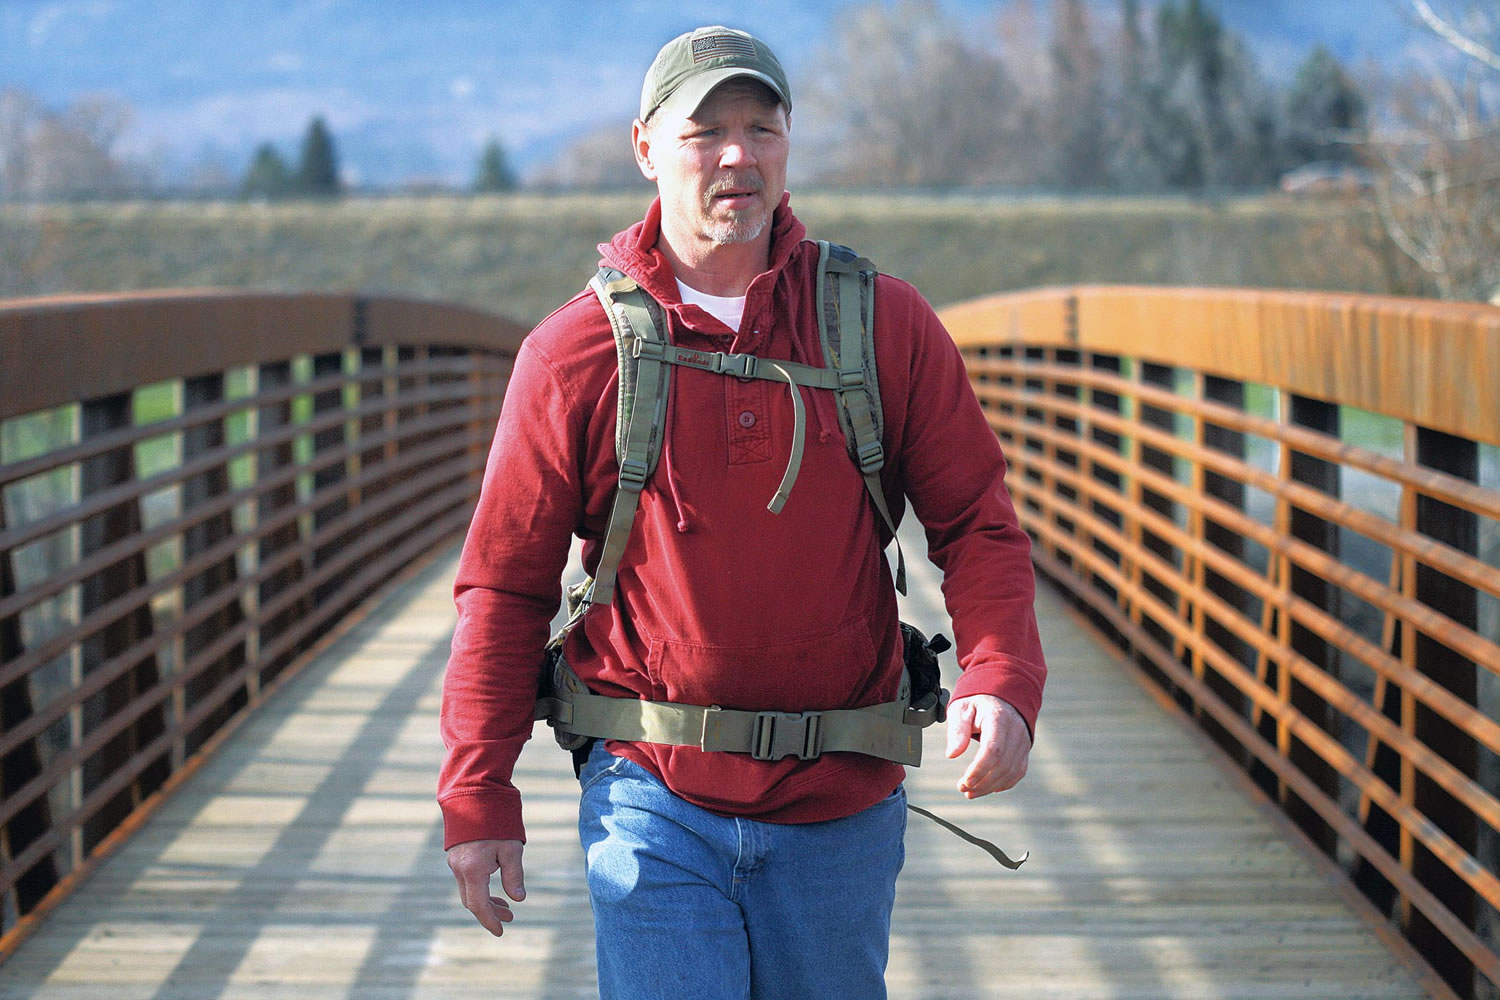 Chris Baxter/The Observer (La Grande, Ore.)
Joe Bell crosses a bridge at Riverside Park in La Grande, Ore., on March 19 in his preparations to walk across the United States to honor his late son, Jadin, and promote an anti-bullying program. Bell, the father of a gay Oregon teenager from who hanged himself is ready to begin walking across the United States to spread his message against bullying.